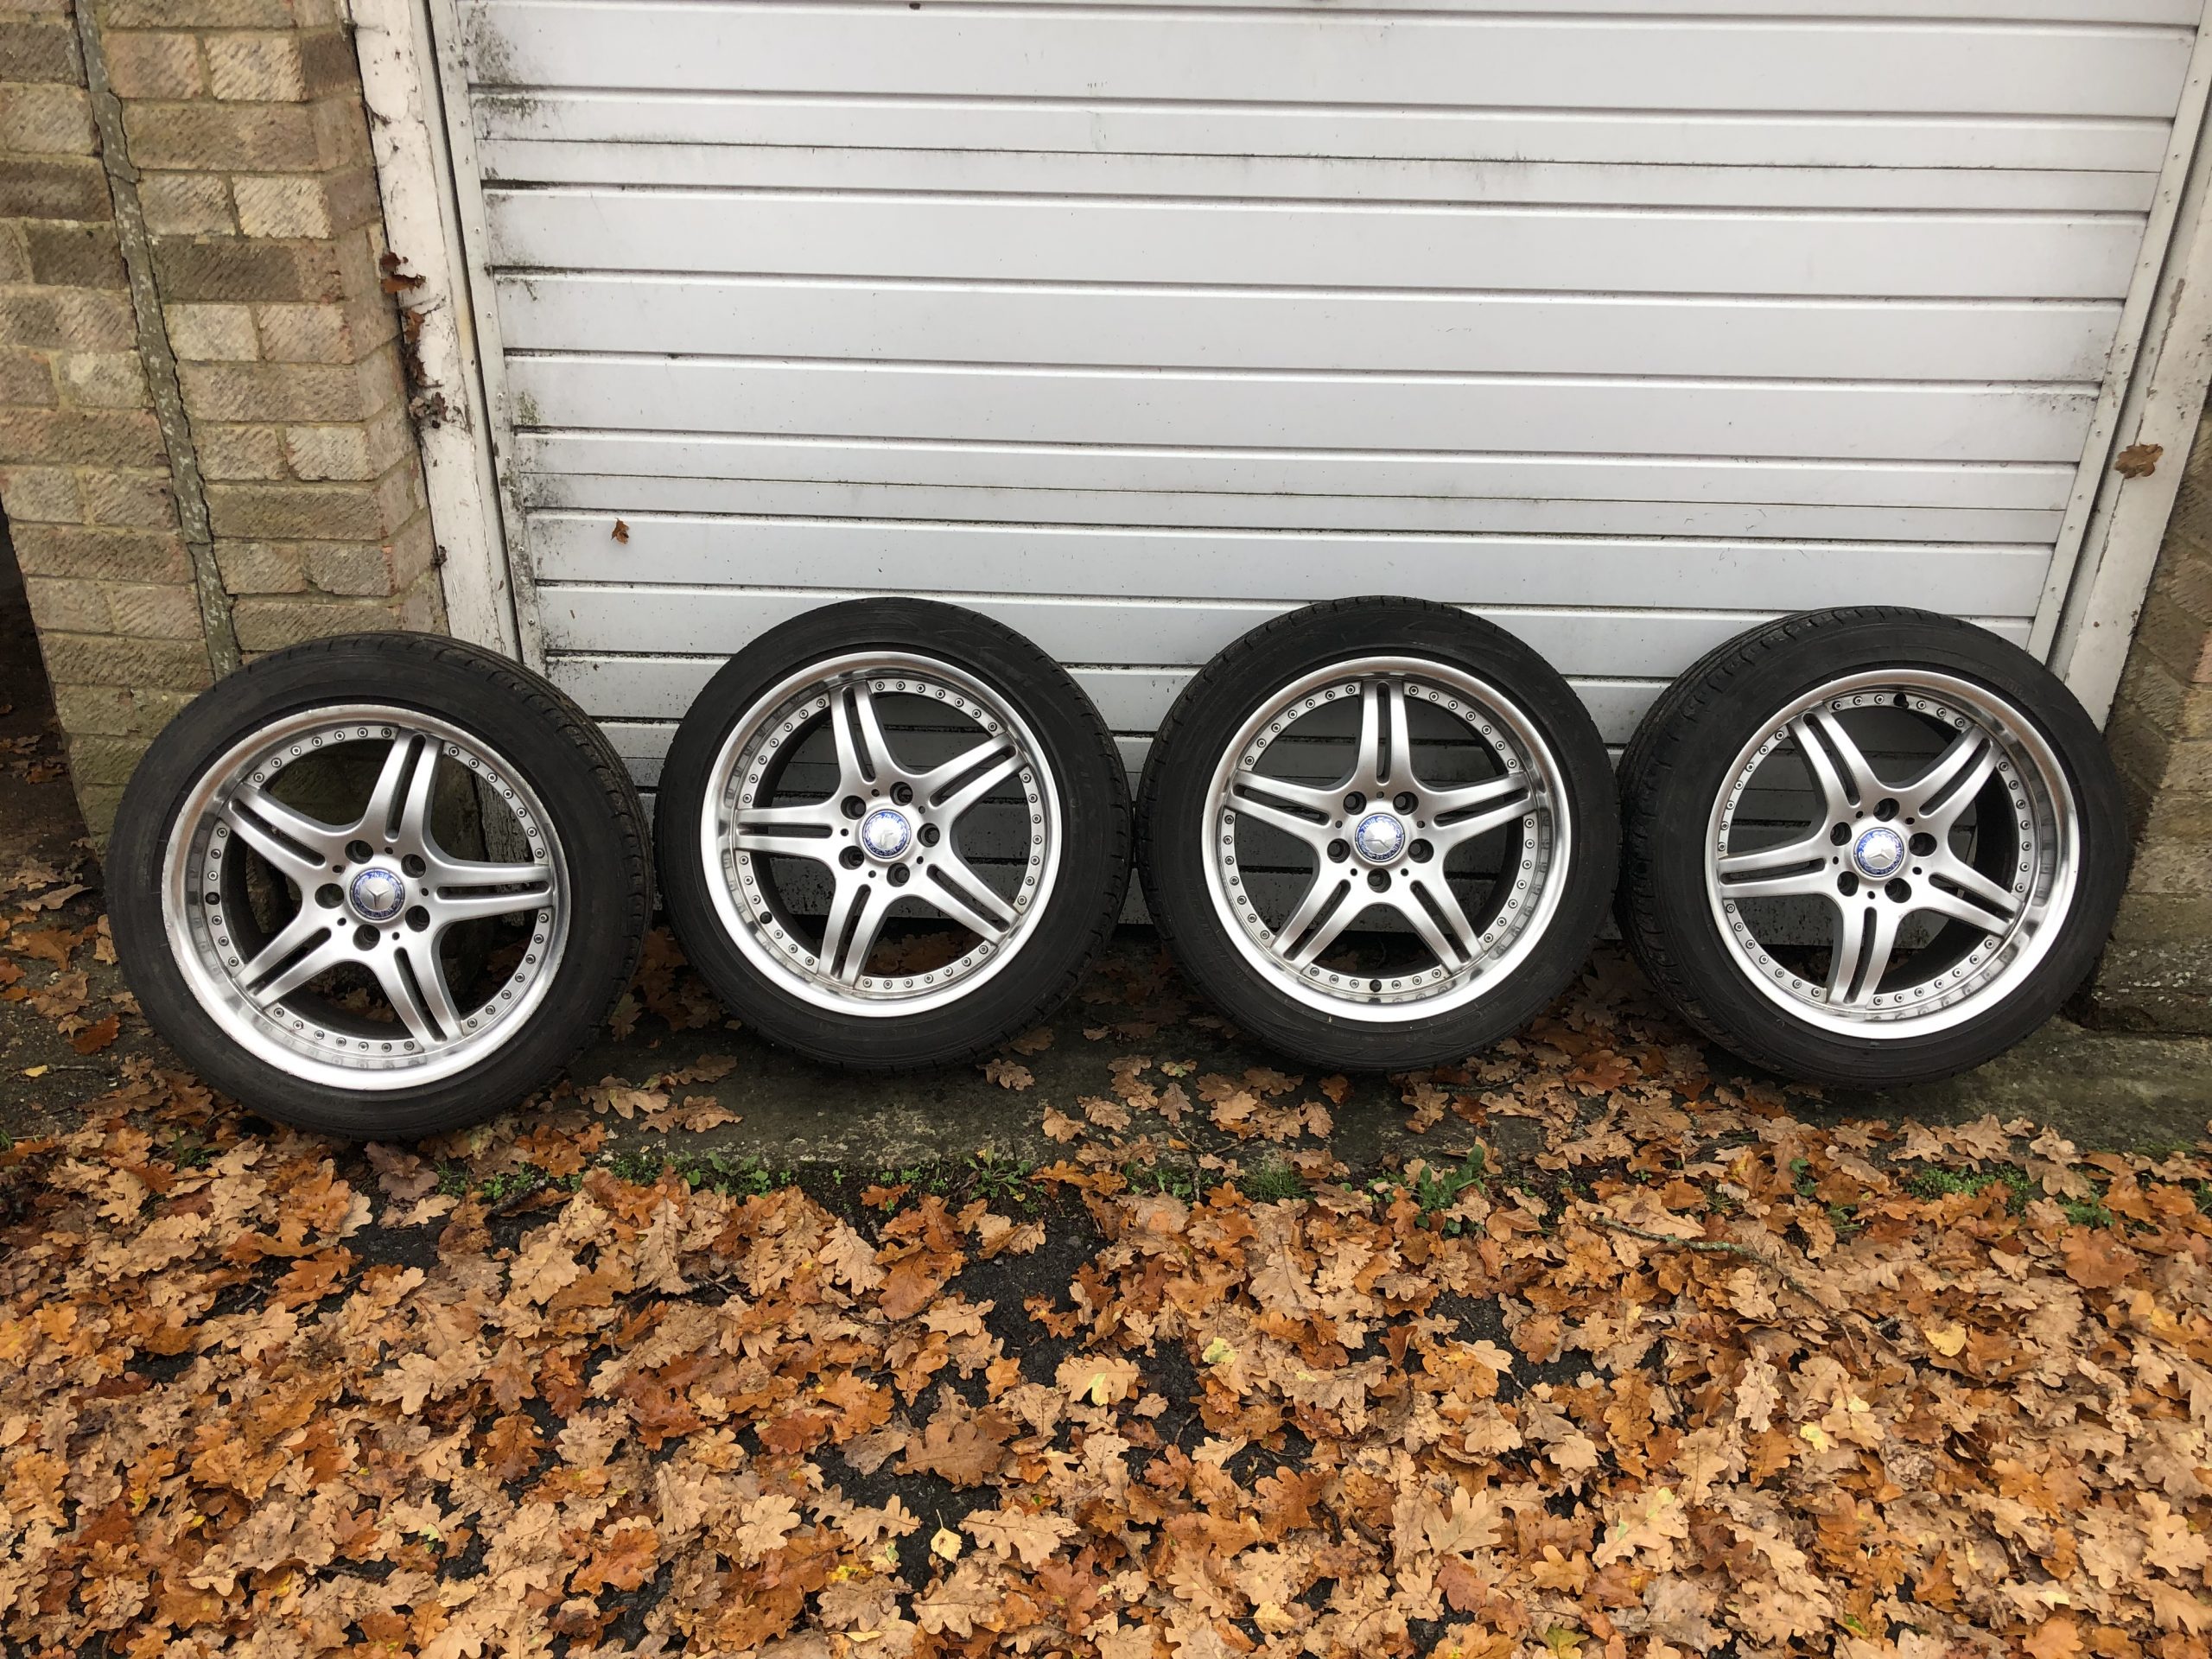 Model Wheels and Tyres